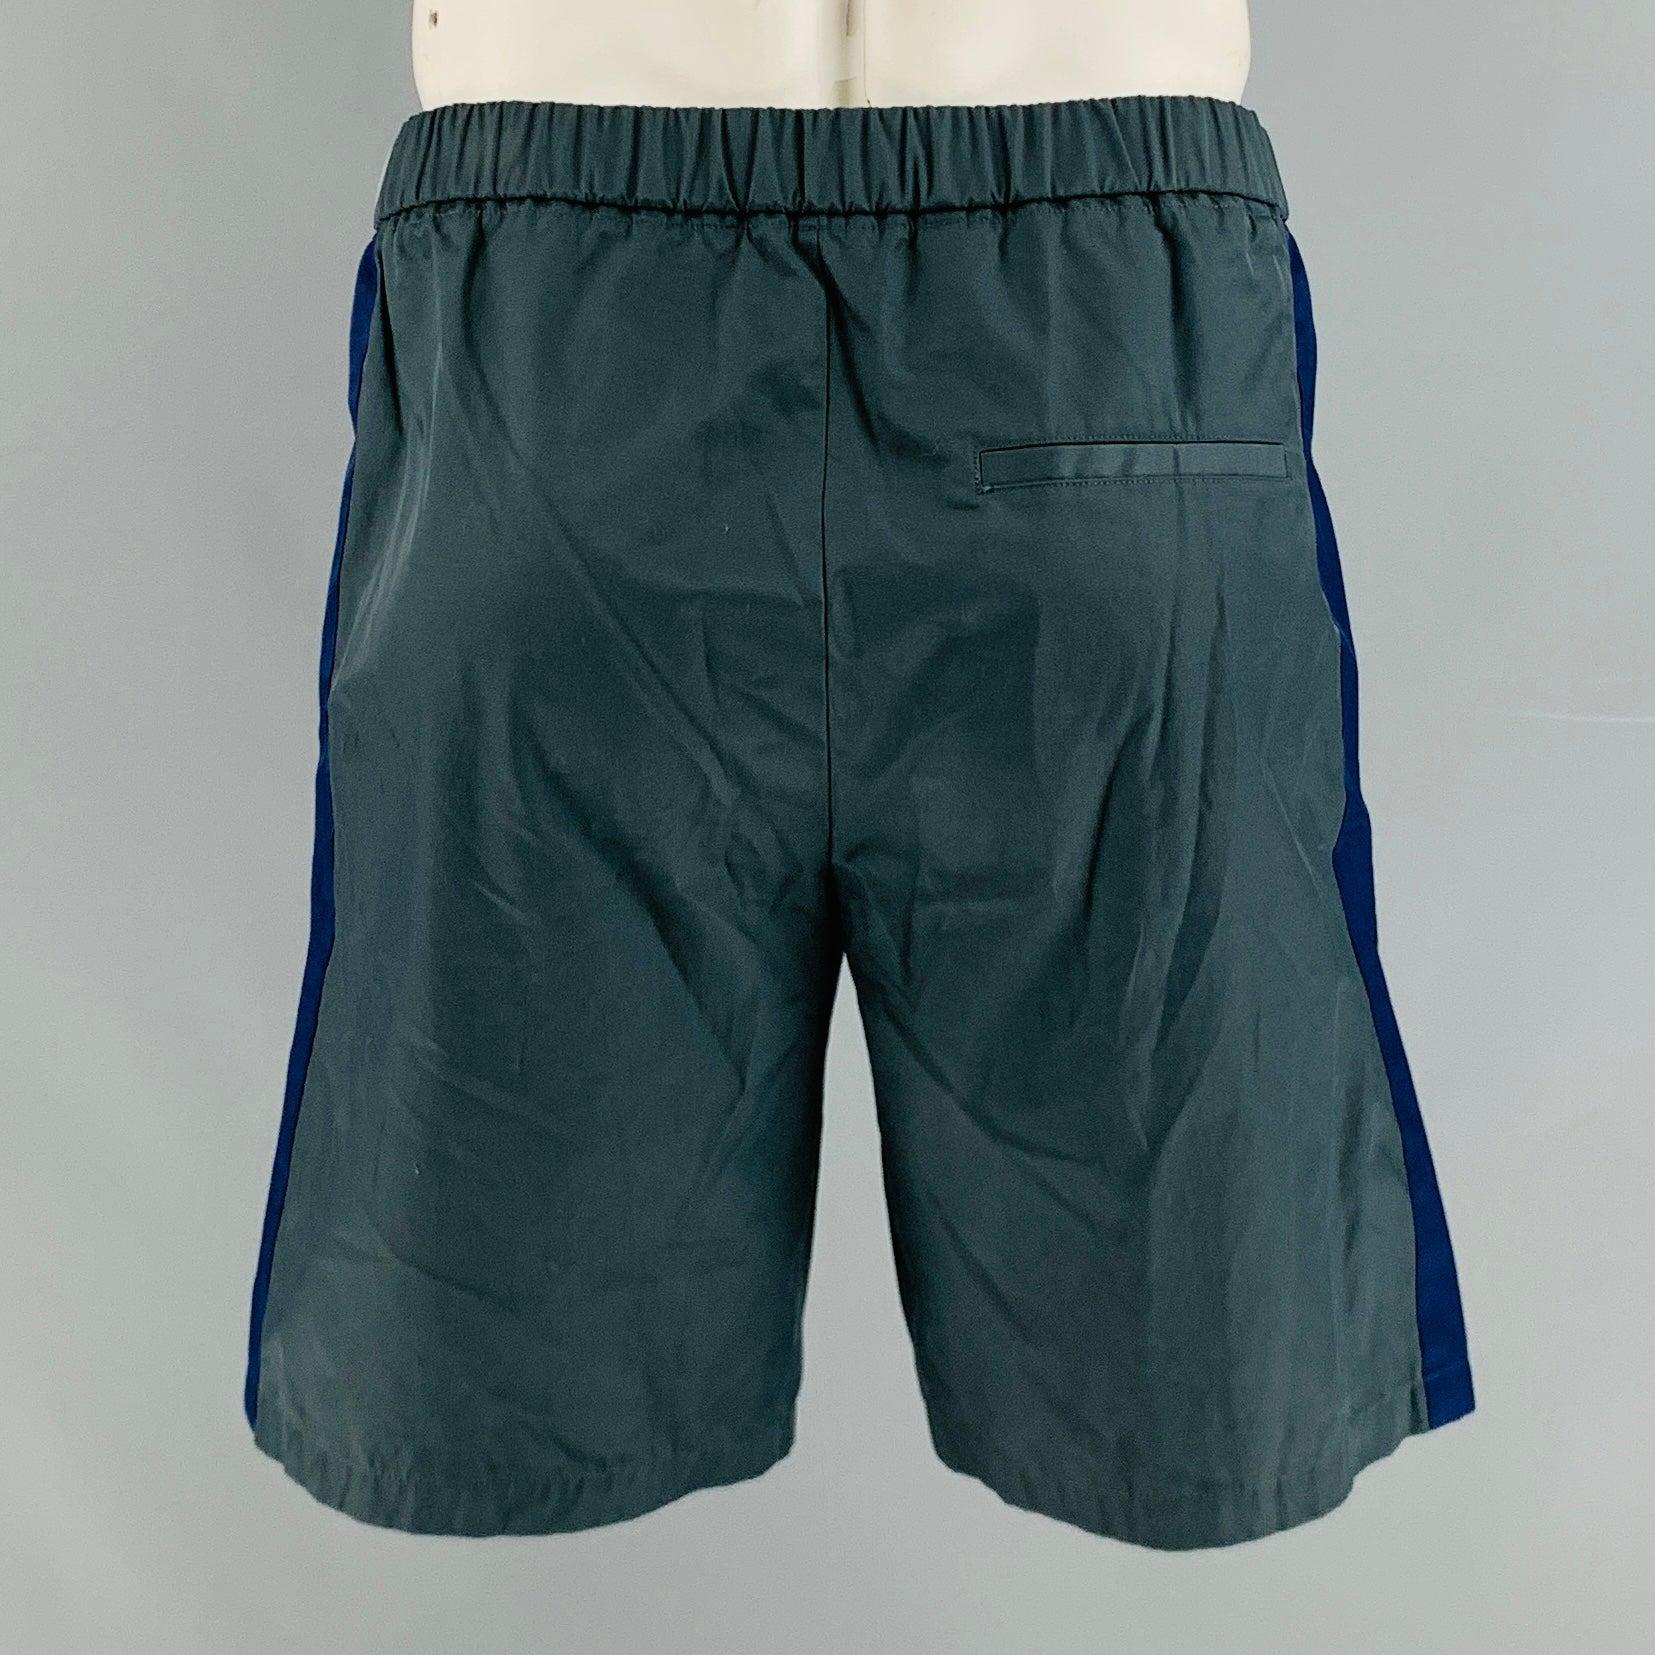 MARNI Size 34 Grey Blue Vertical Stripe Cotton Blend Elastic Waistband Shorts In Excellent Condition For Sale In San Francisco, CA